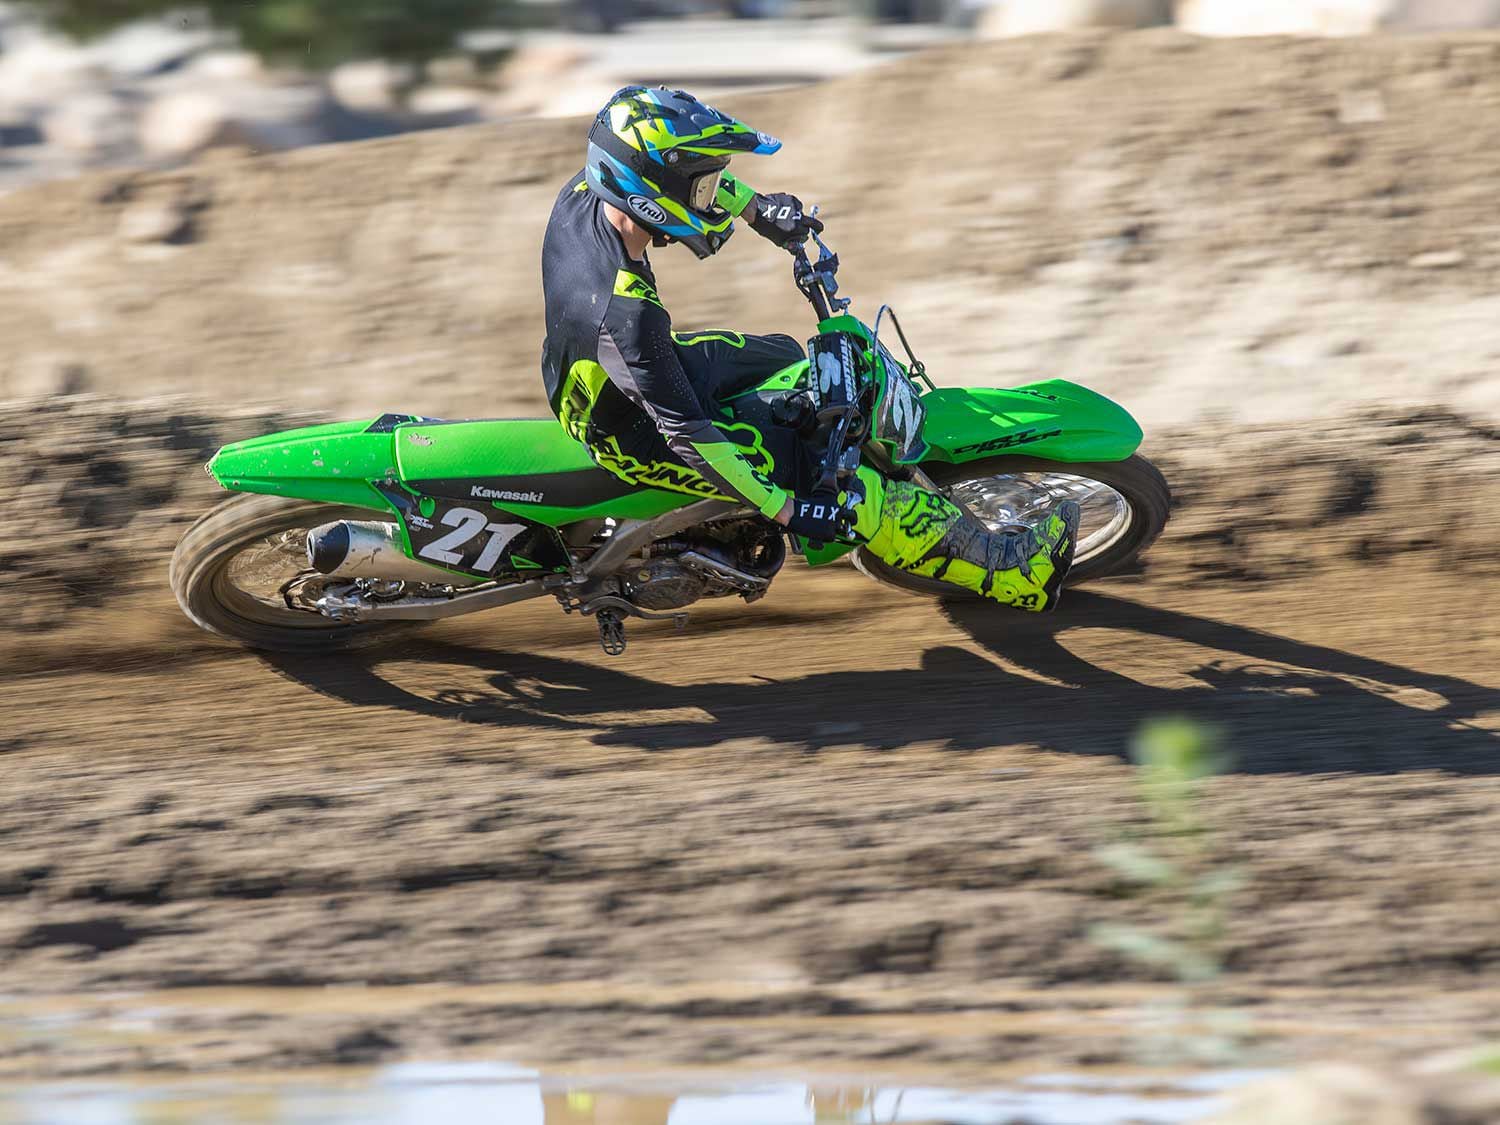 “The suspension on the KX250 took the longest for me to find the right setting, and even then, it still felt very stiff over small- to medium-sized chatter bumps and deceleration bumps.” <em>—Michael Gilbert</em>